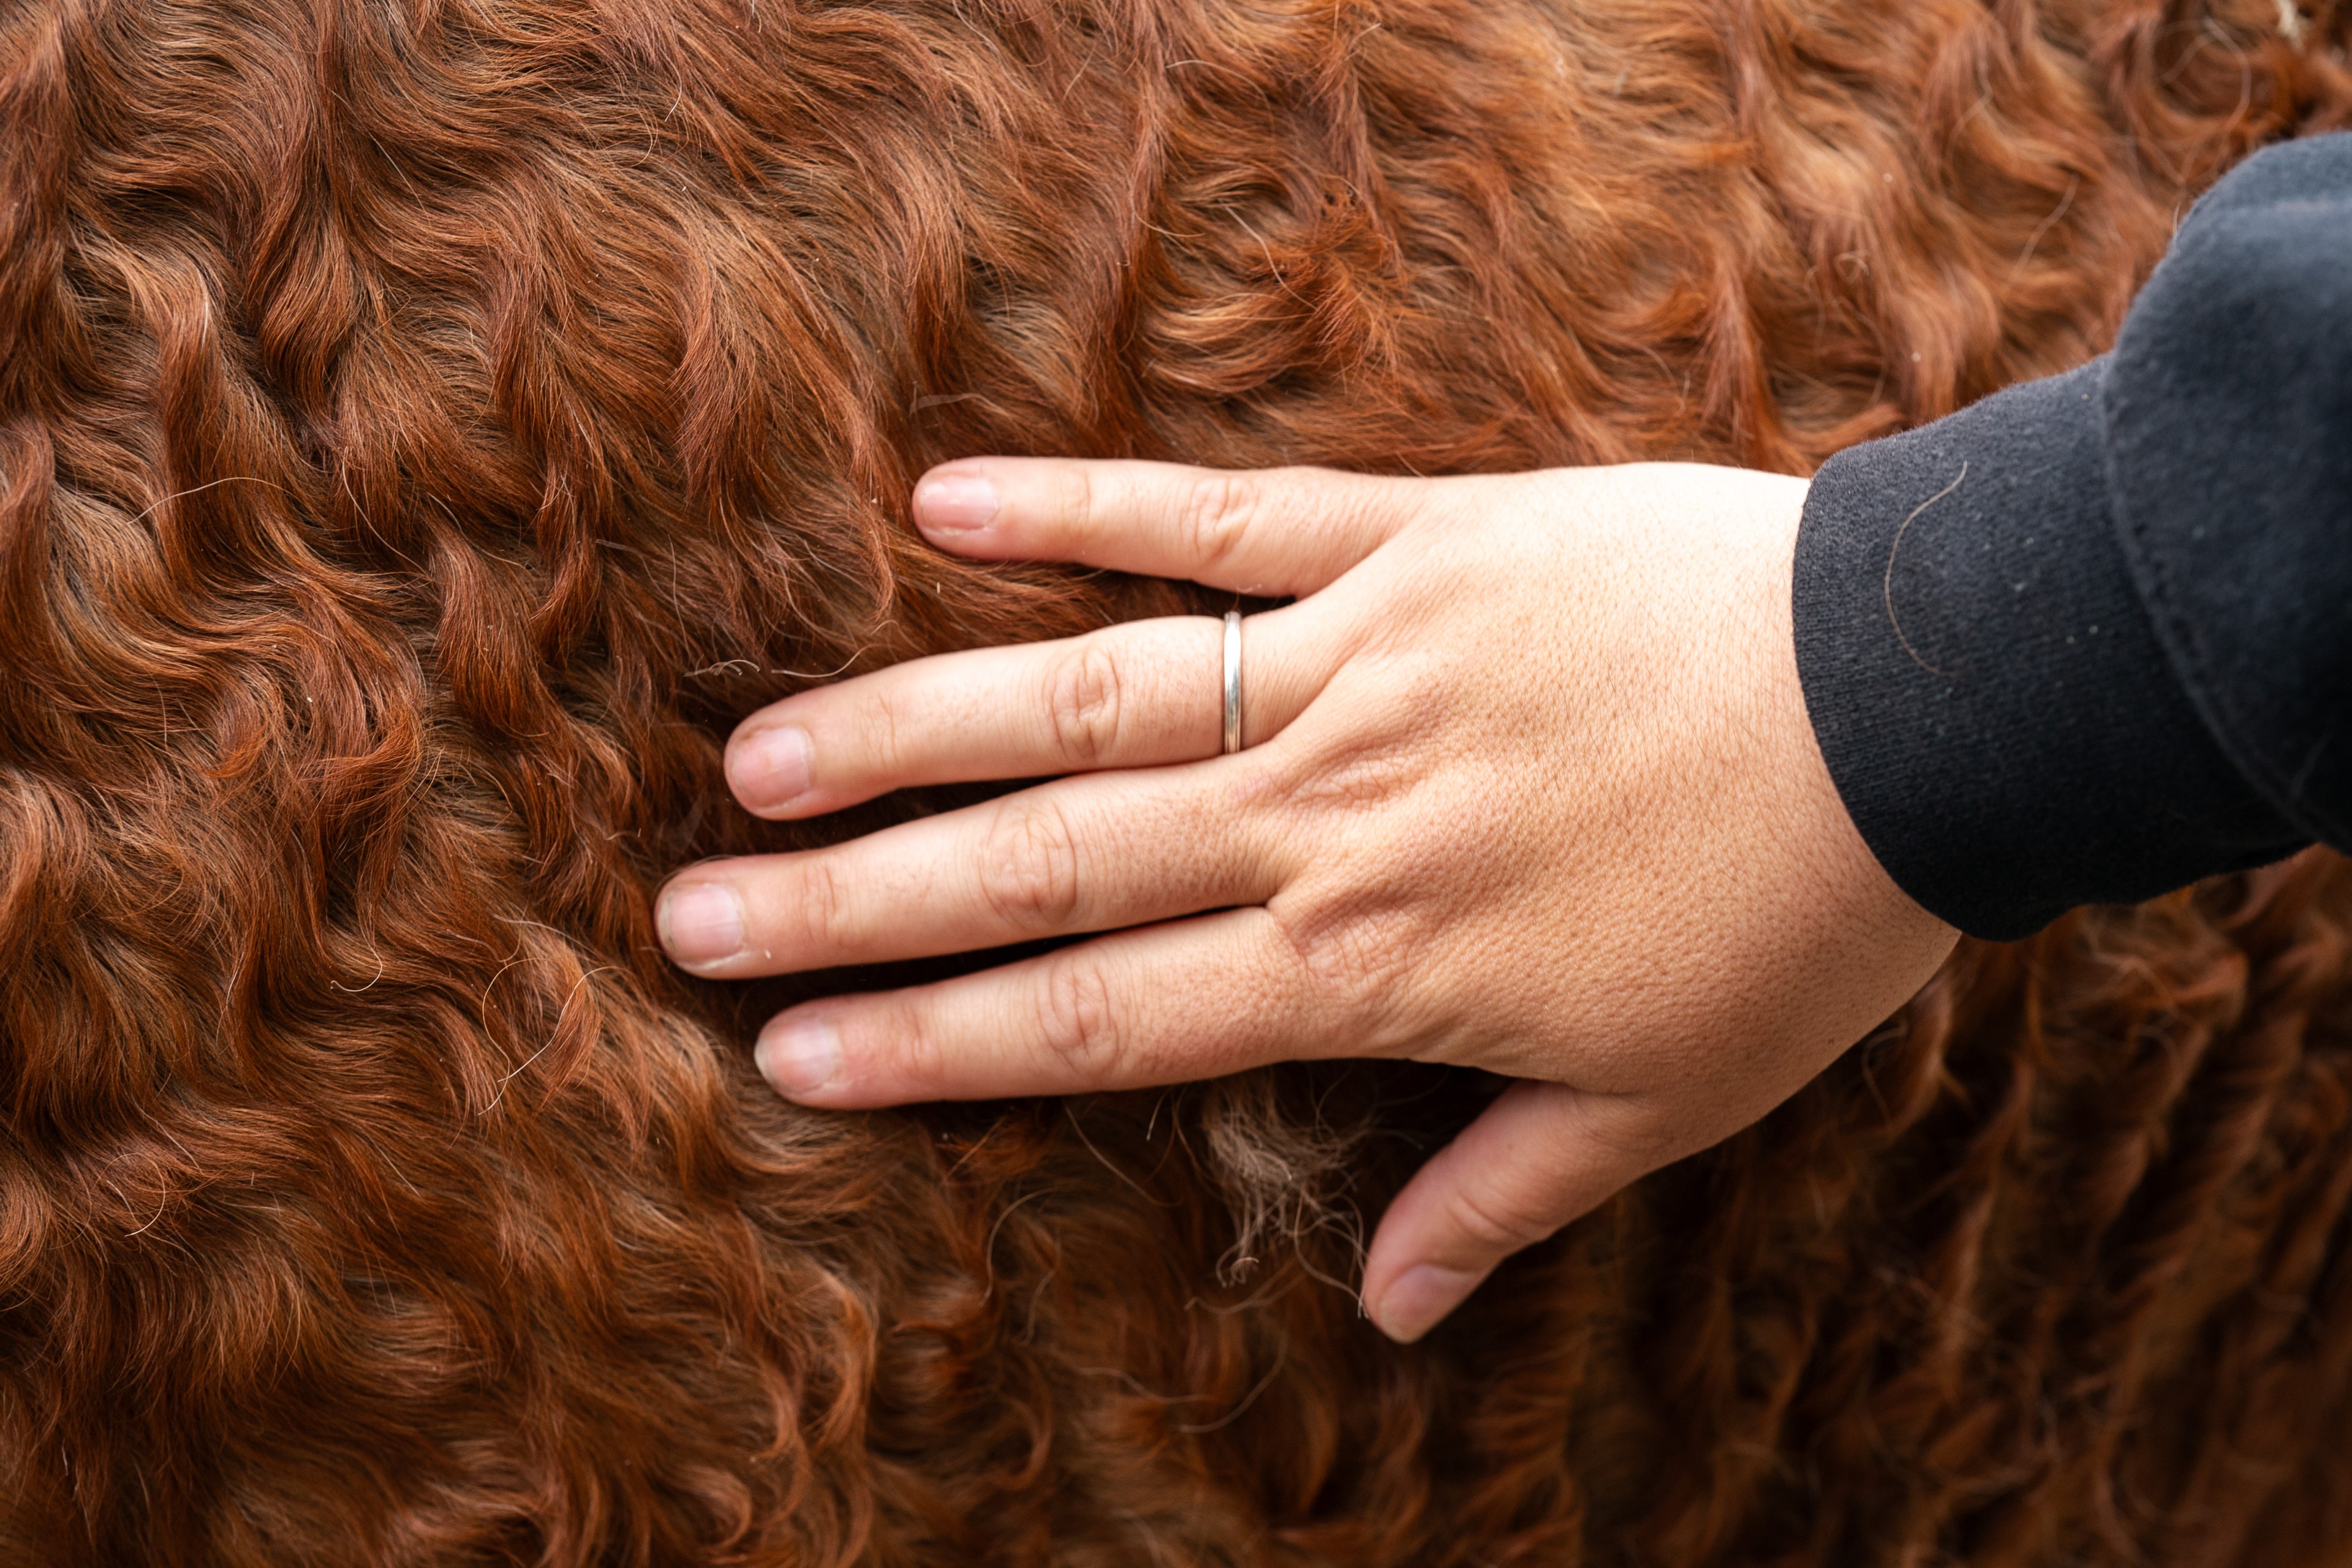 A person's hand with a ring touches dense, reddish-brown curly fur or hair.